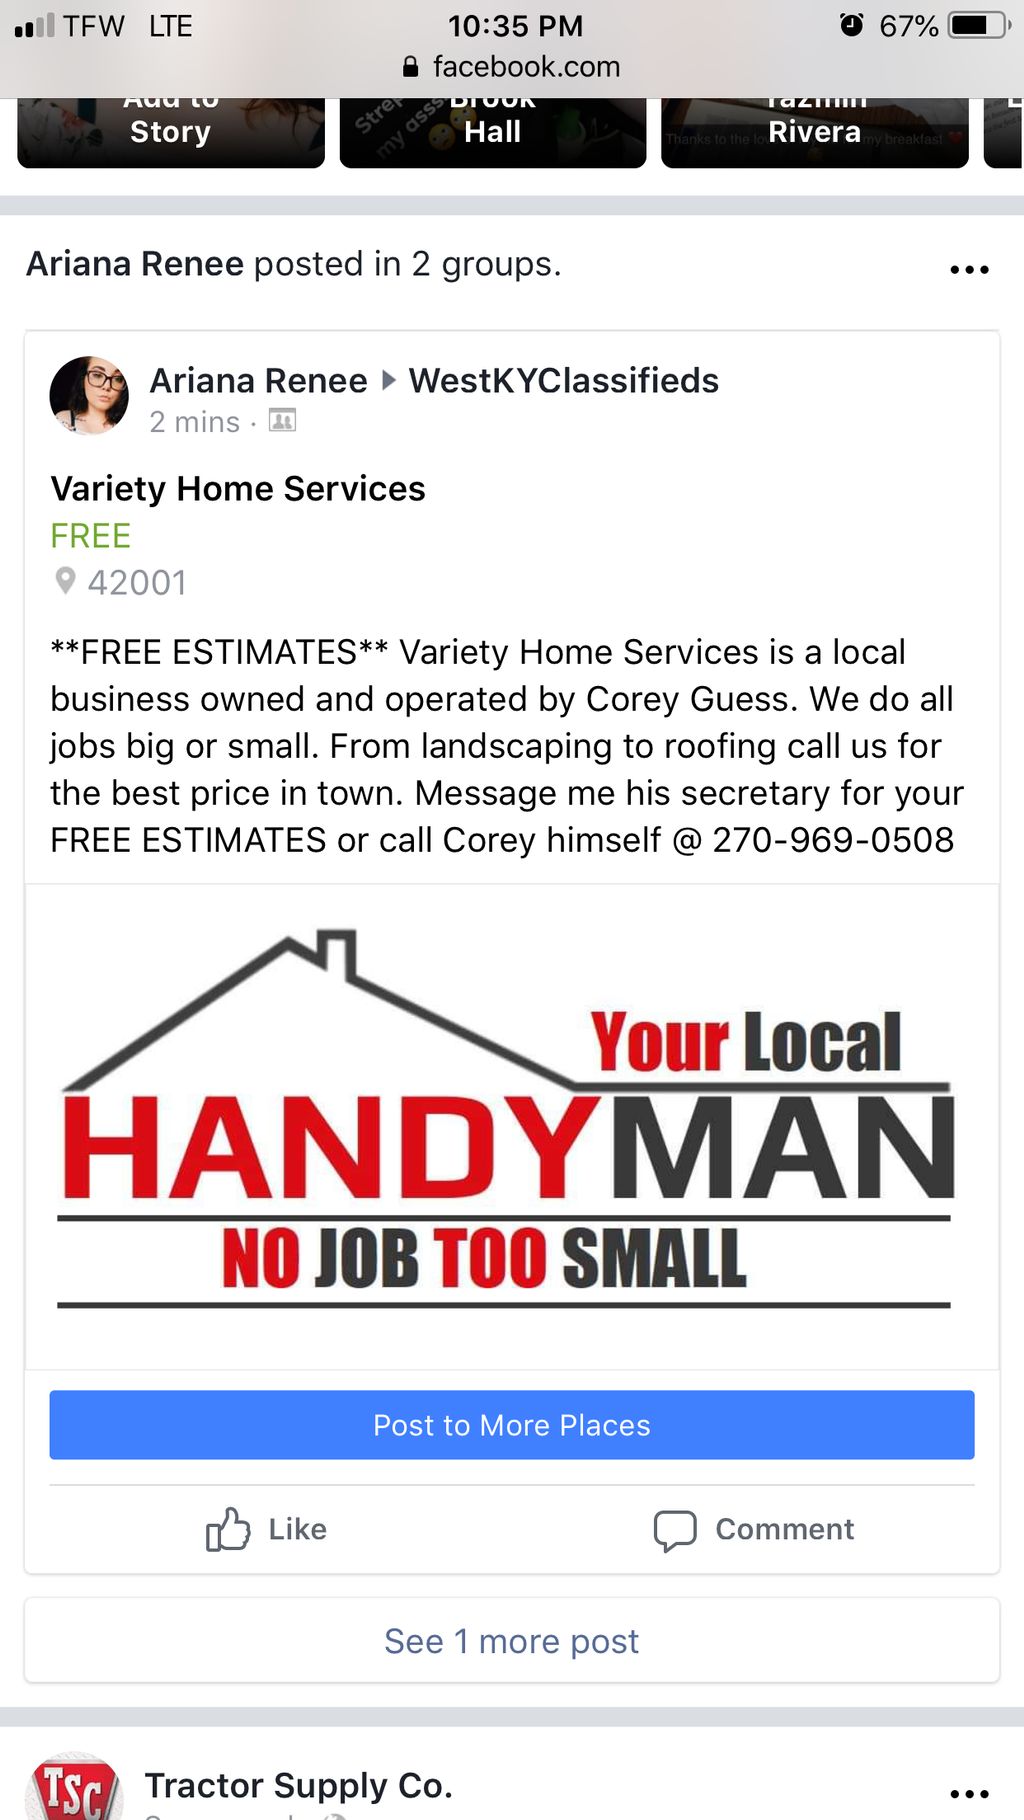 Variety Home Services